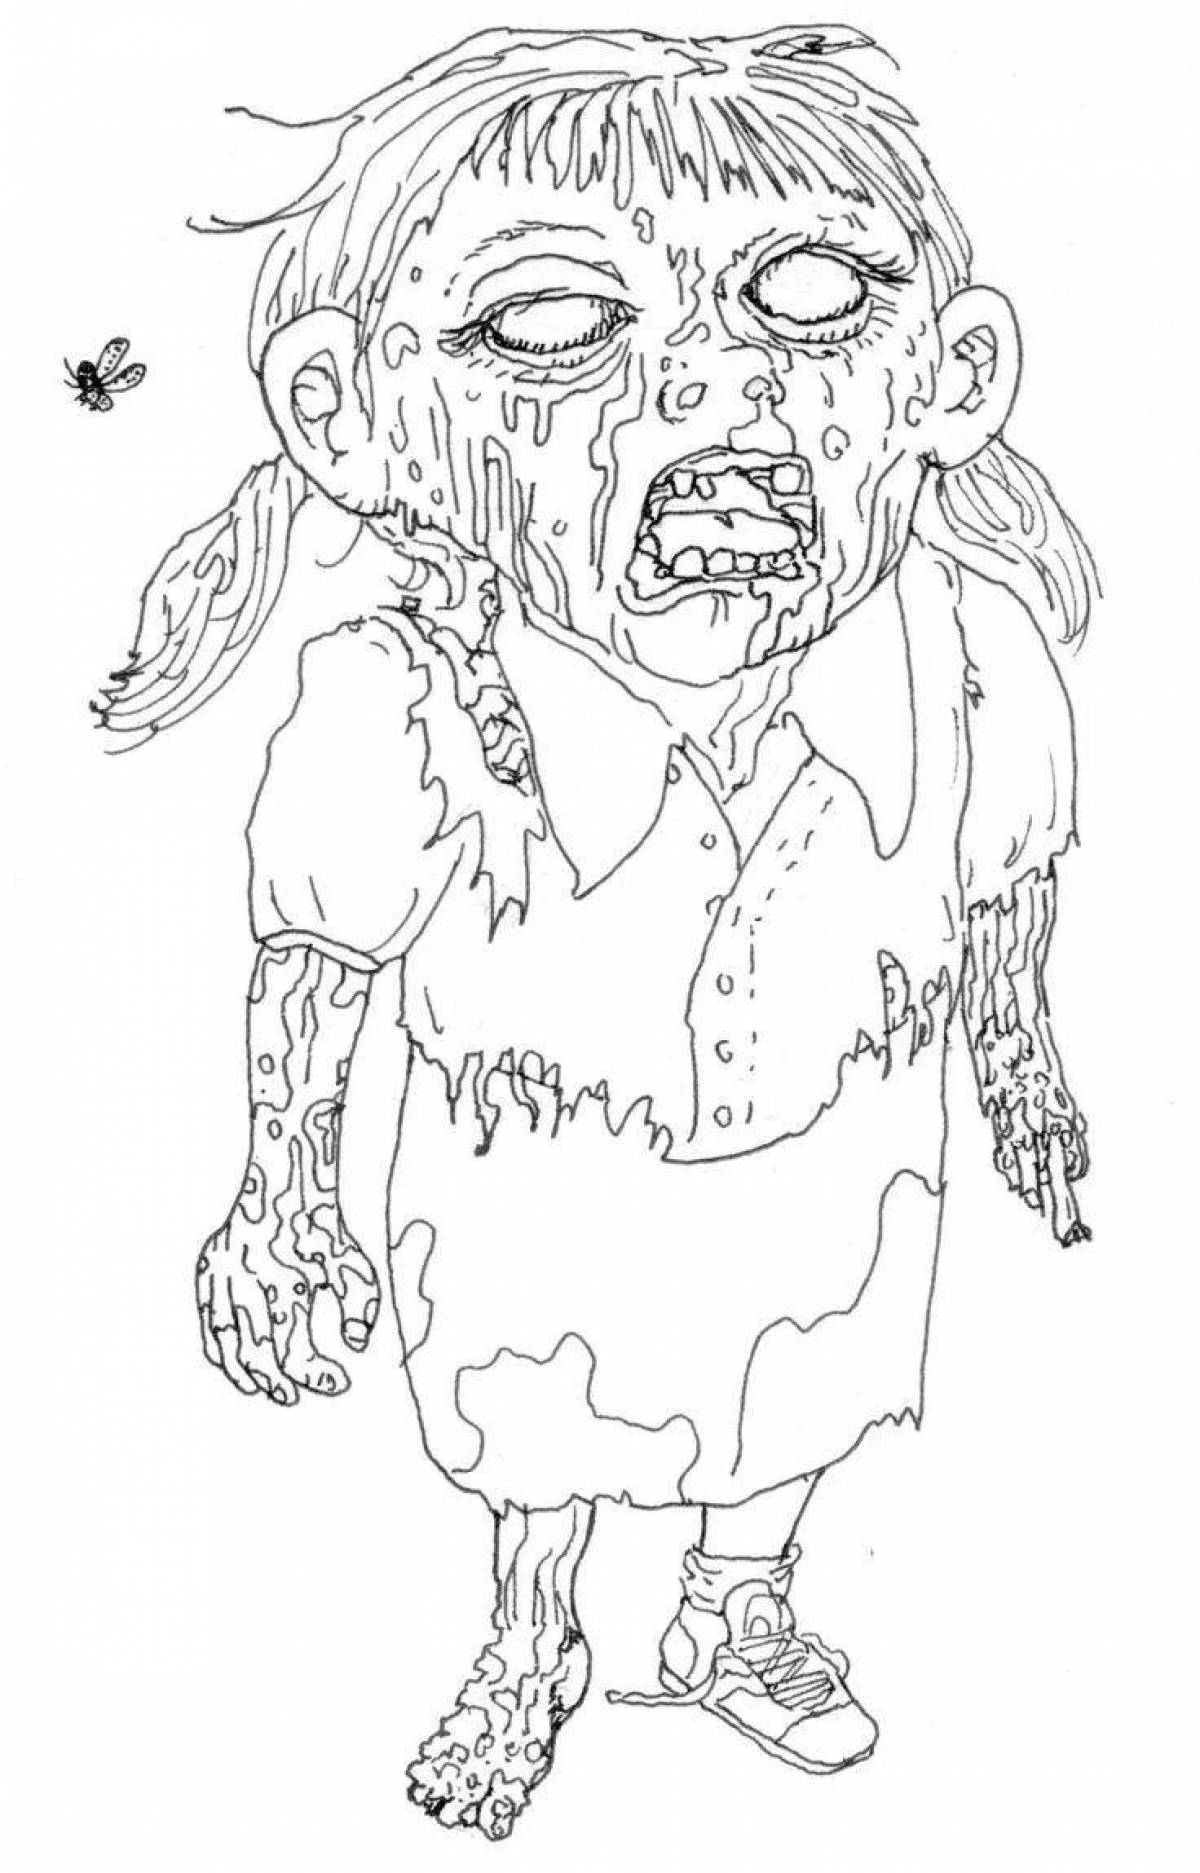 Incredible horror coloring book for kids